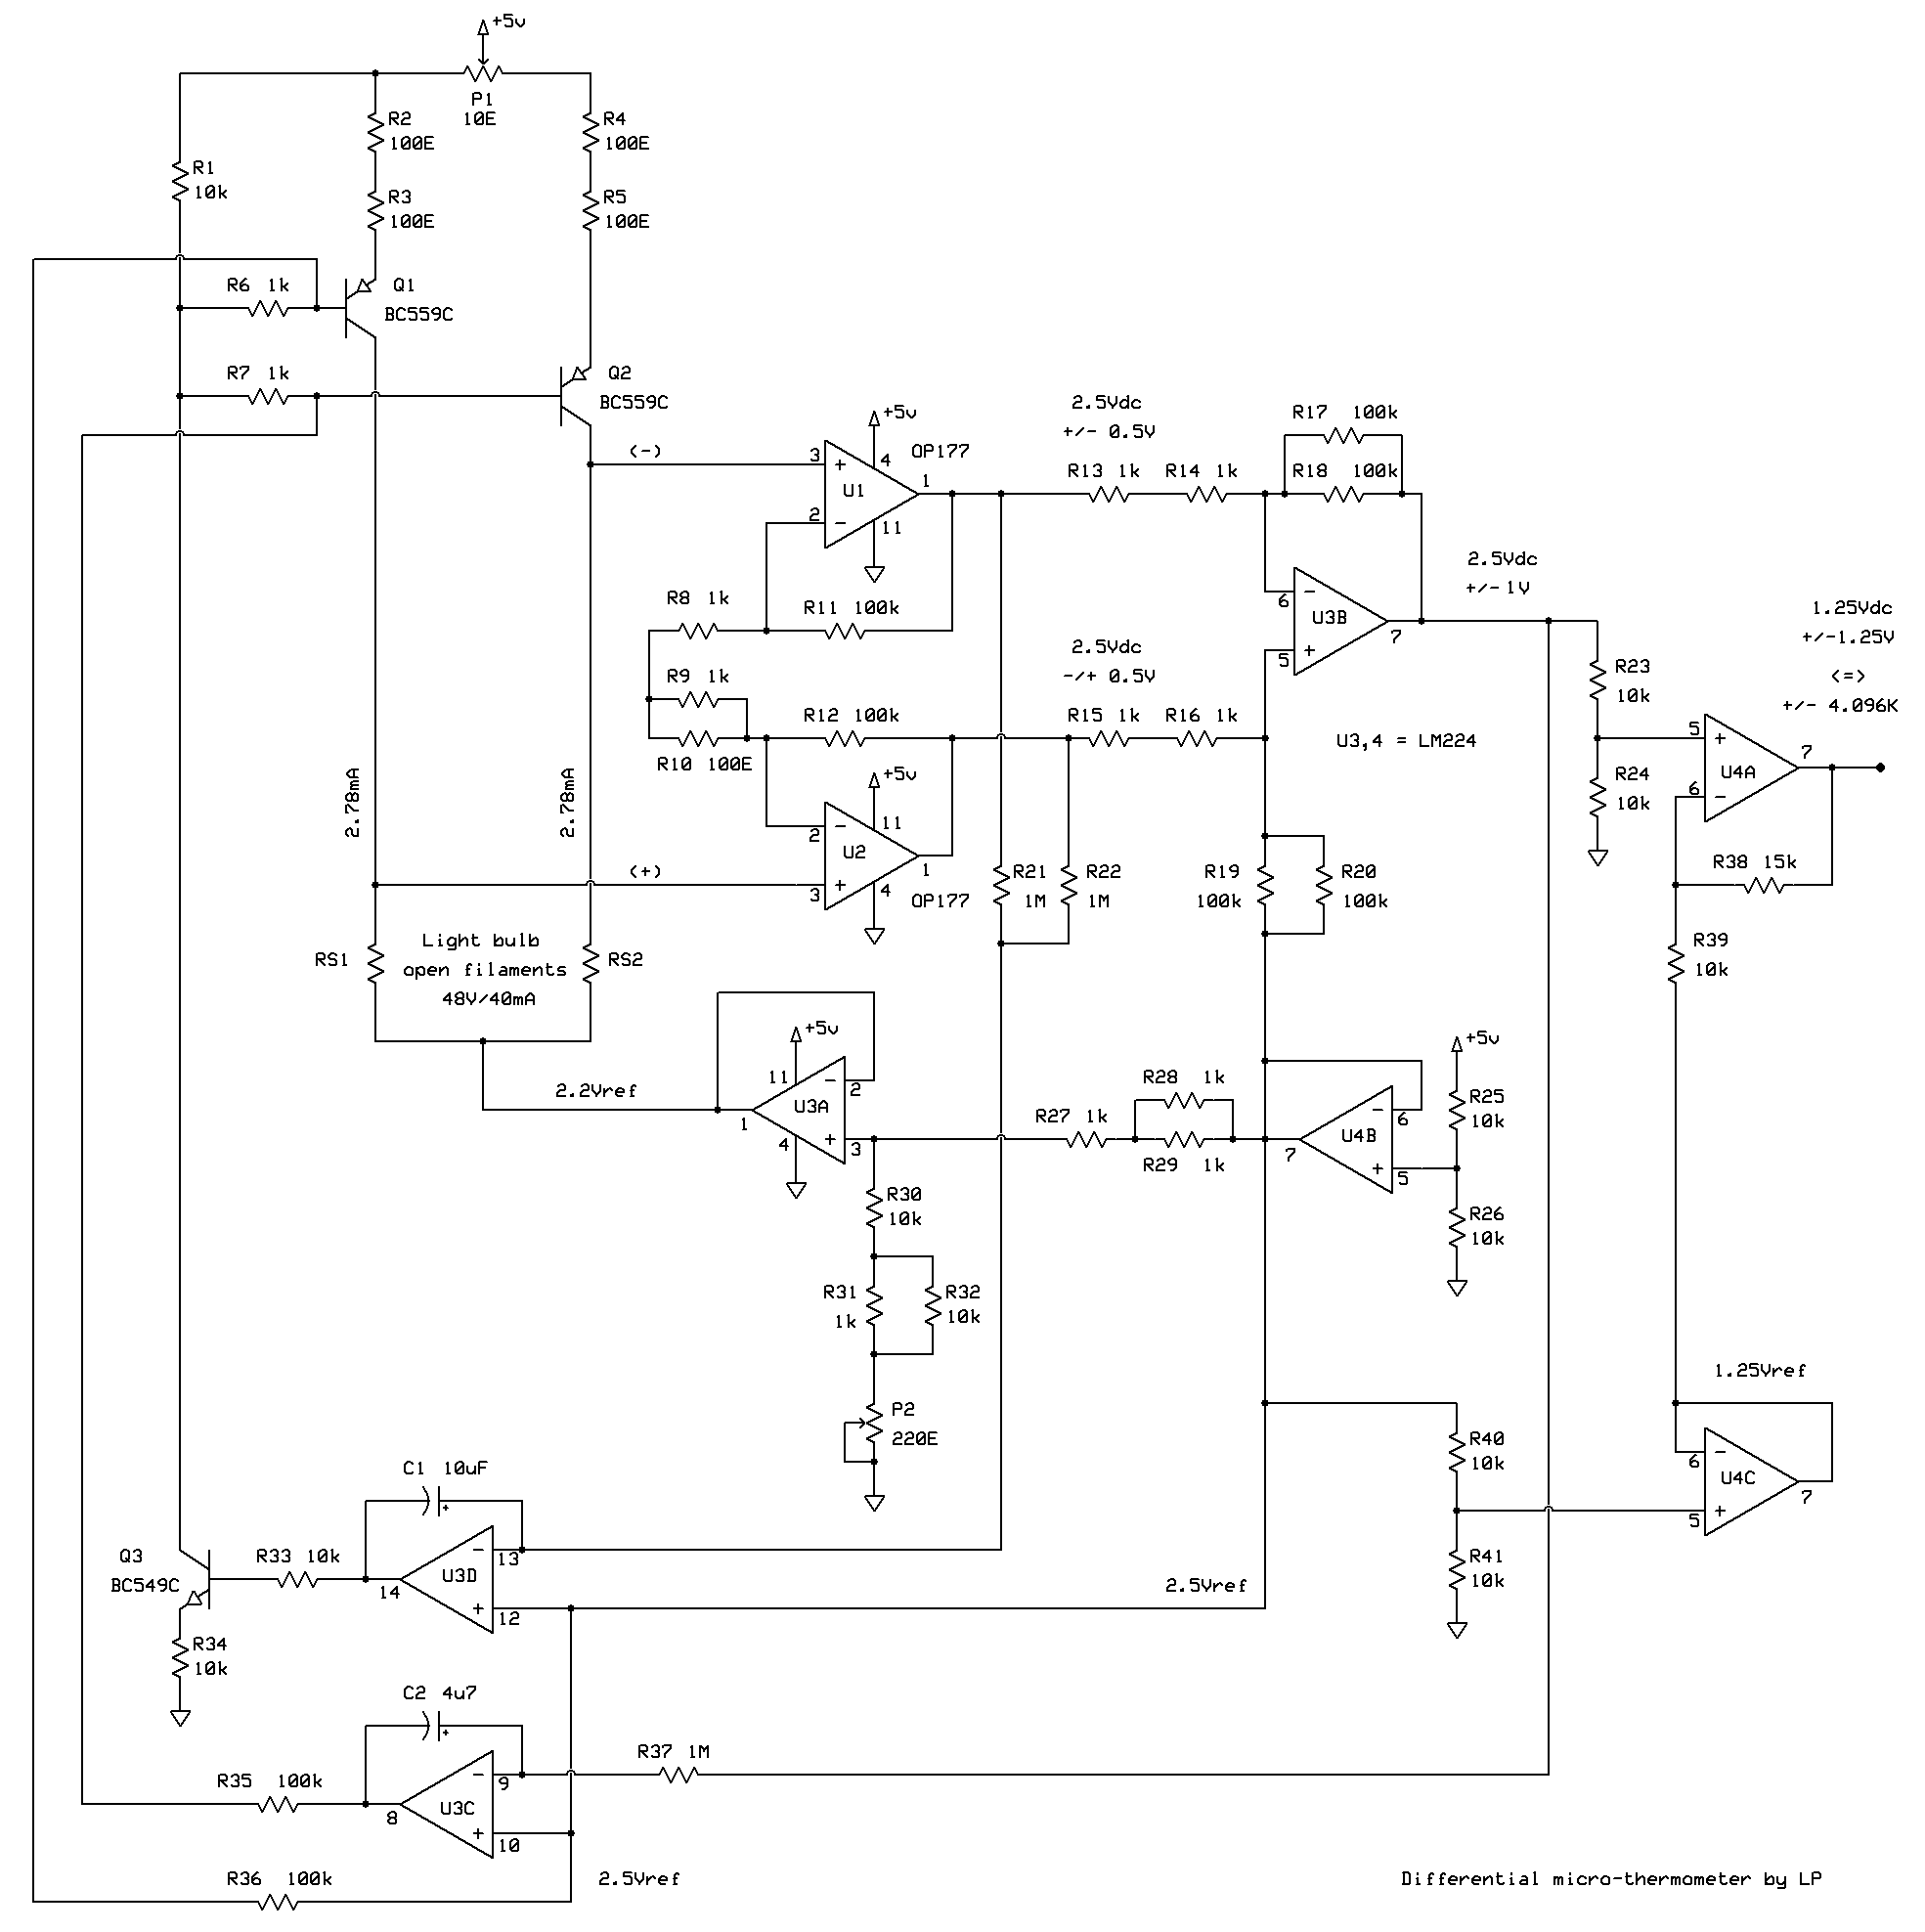 Differential micro-thermometer circuit diagram